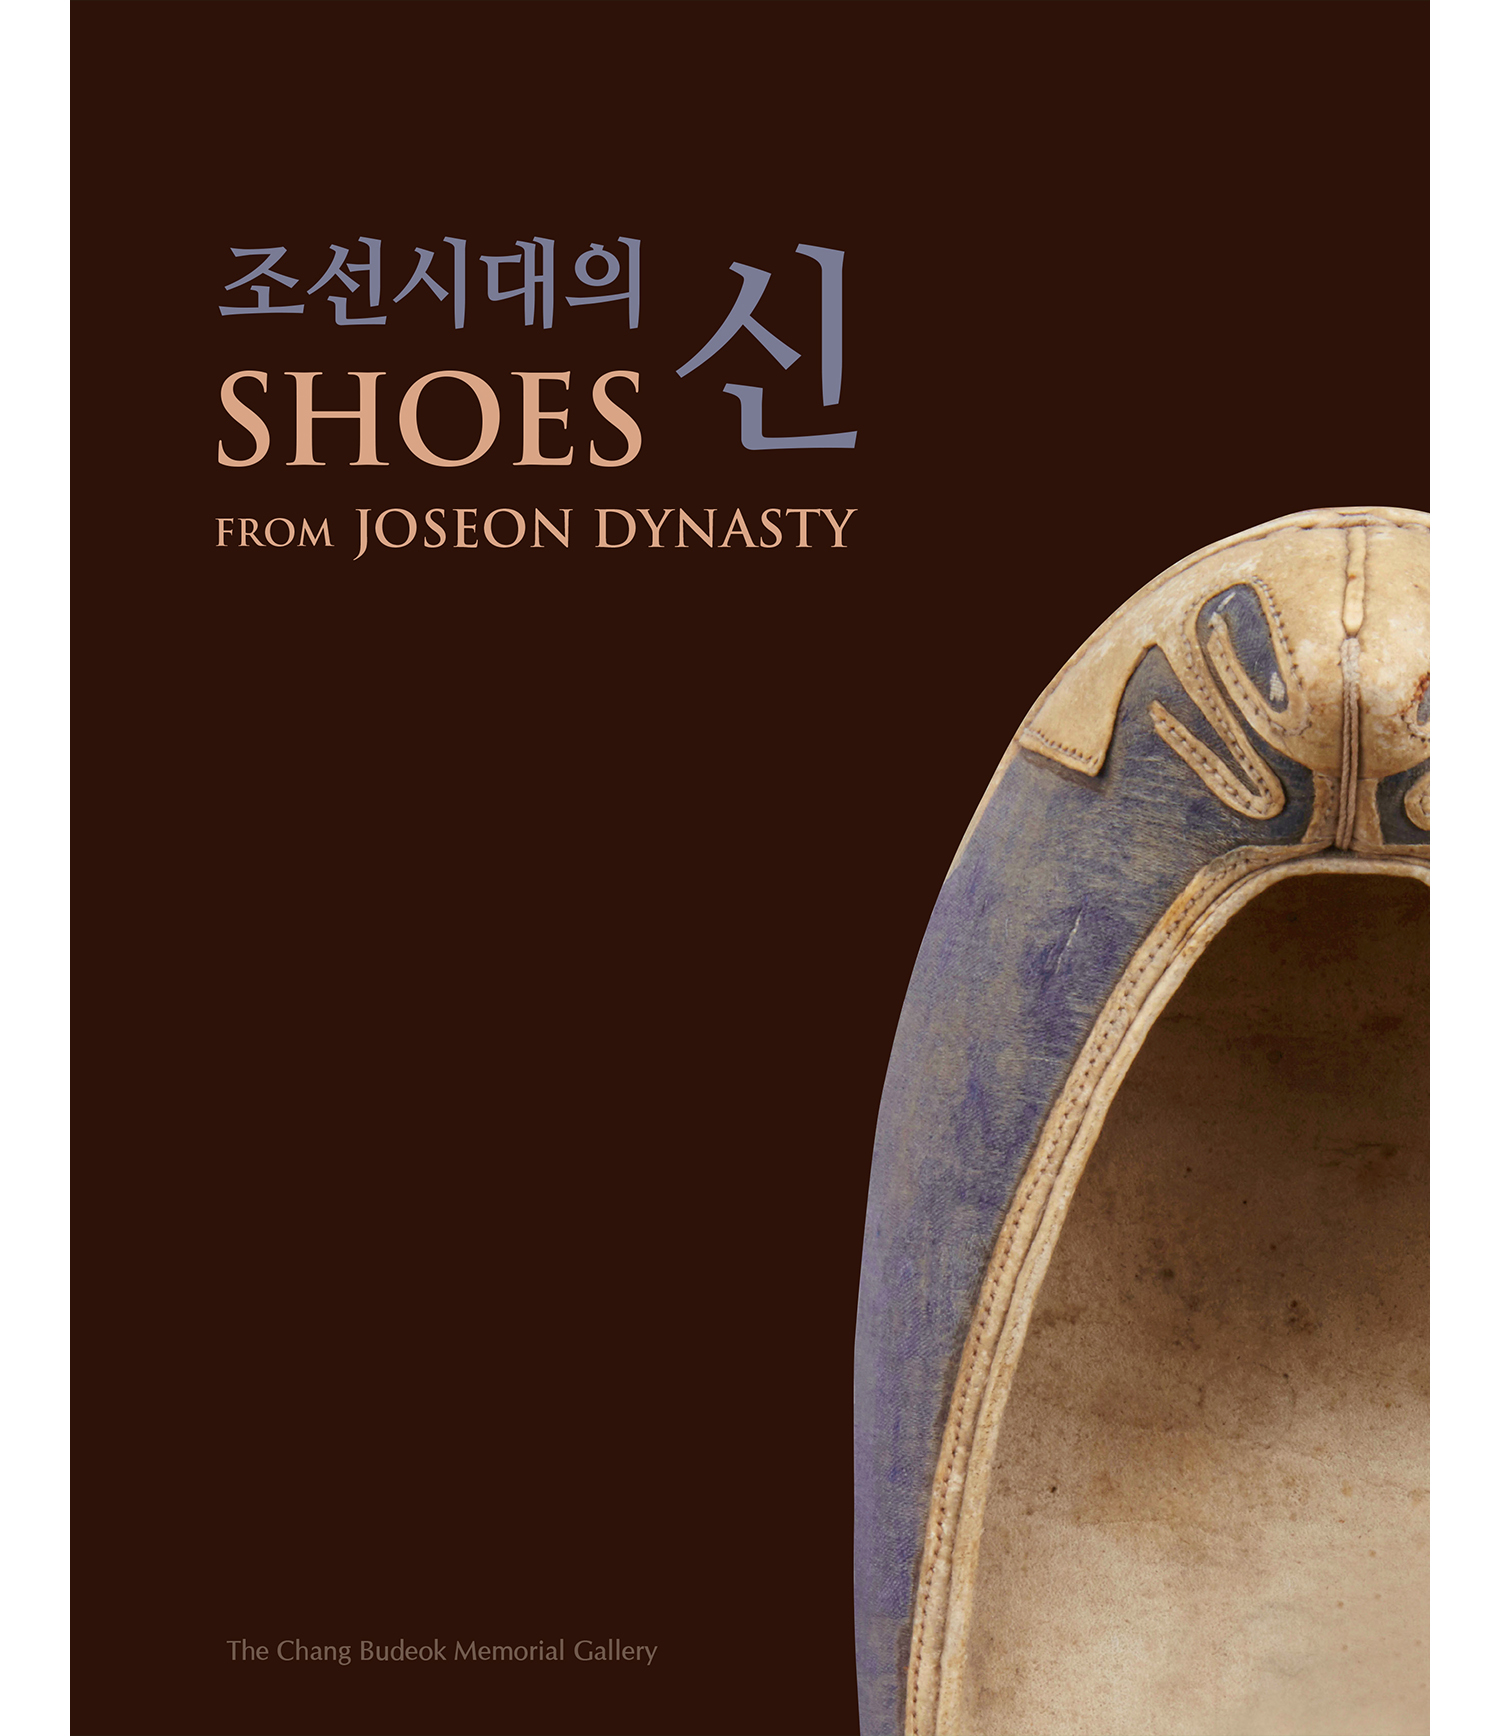 SHOES FROM JOSEON DYNASTY